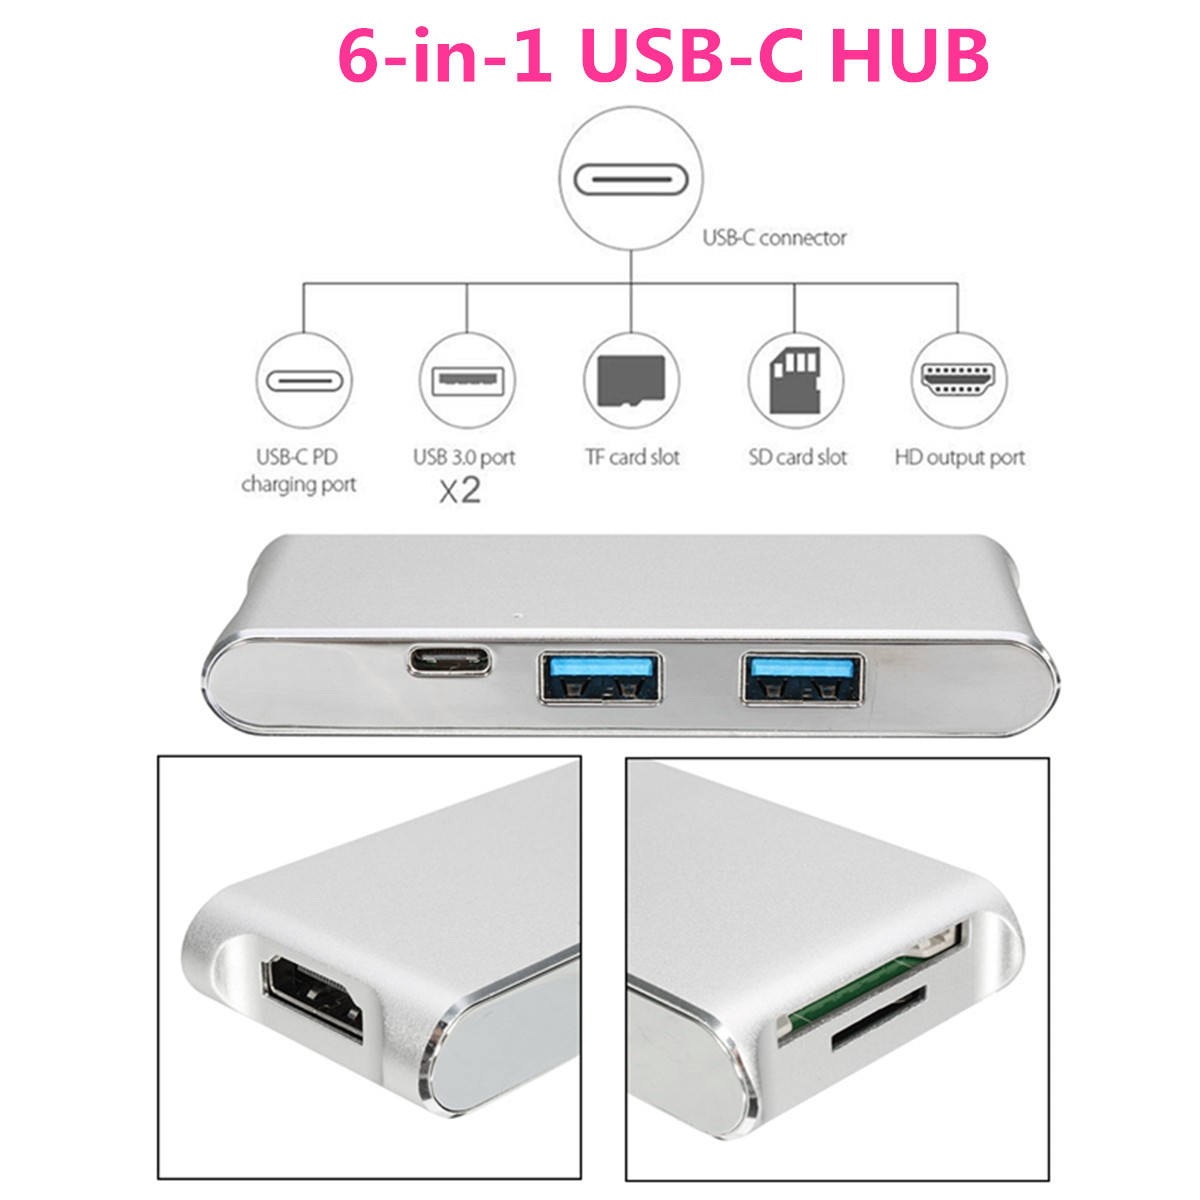 6-in-1-USB-C-HUB-with-Type-C-Power-Delivery-4K-Video-HD-Output-Converter-Alloy-Card-Reader-1231837-1